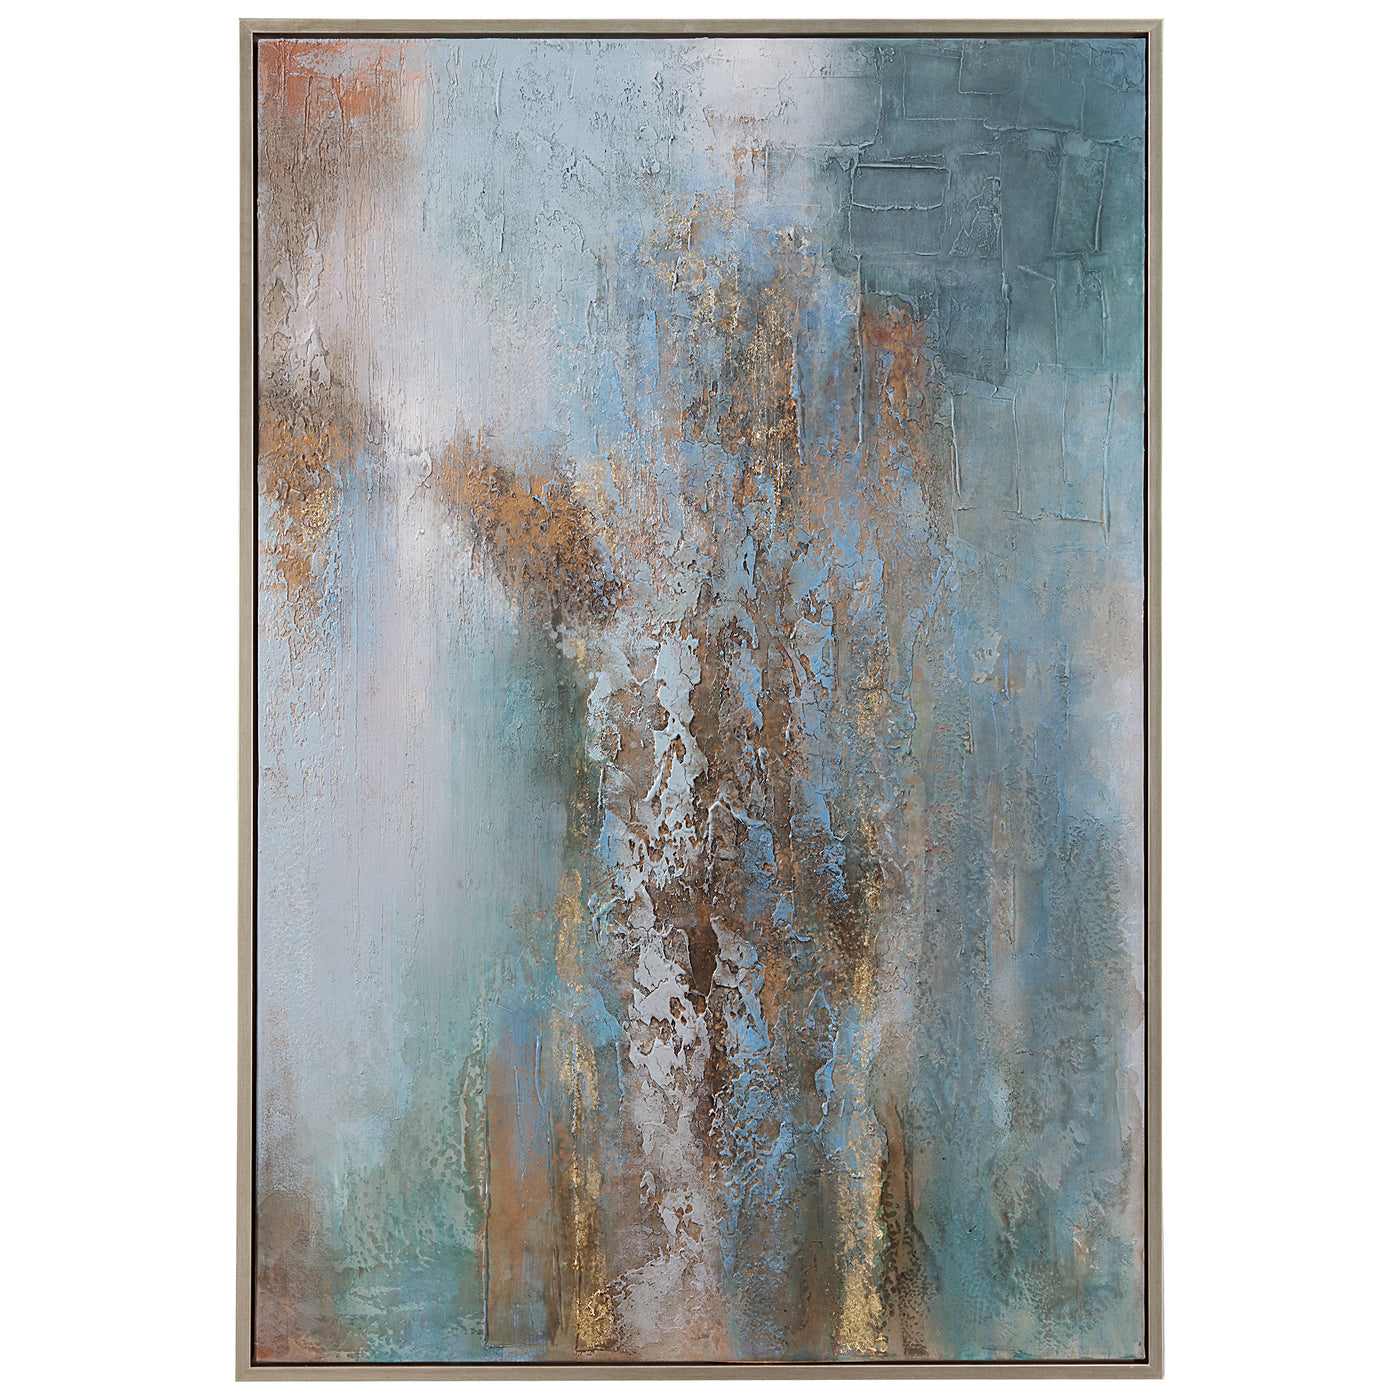 This Hand Painted Abstract Artwork Features A Largely Blue And Green Canvas Accented By Shades Of White, Terra Cotta, Taup...